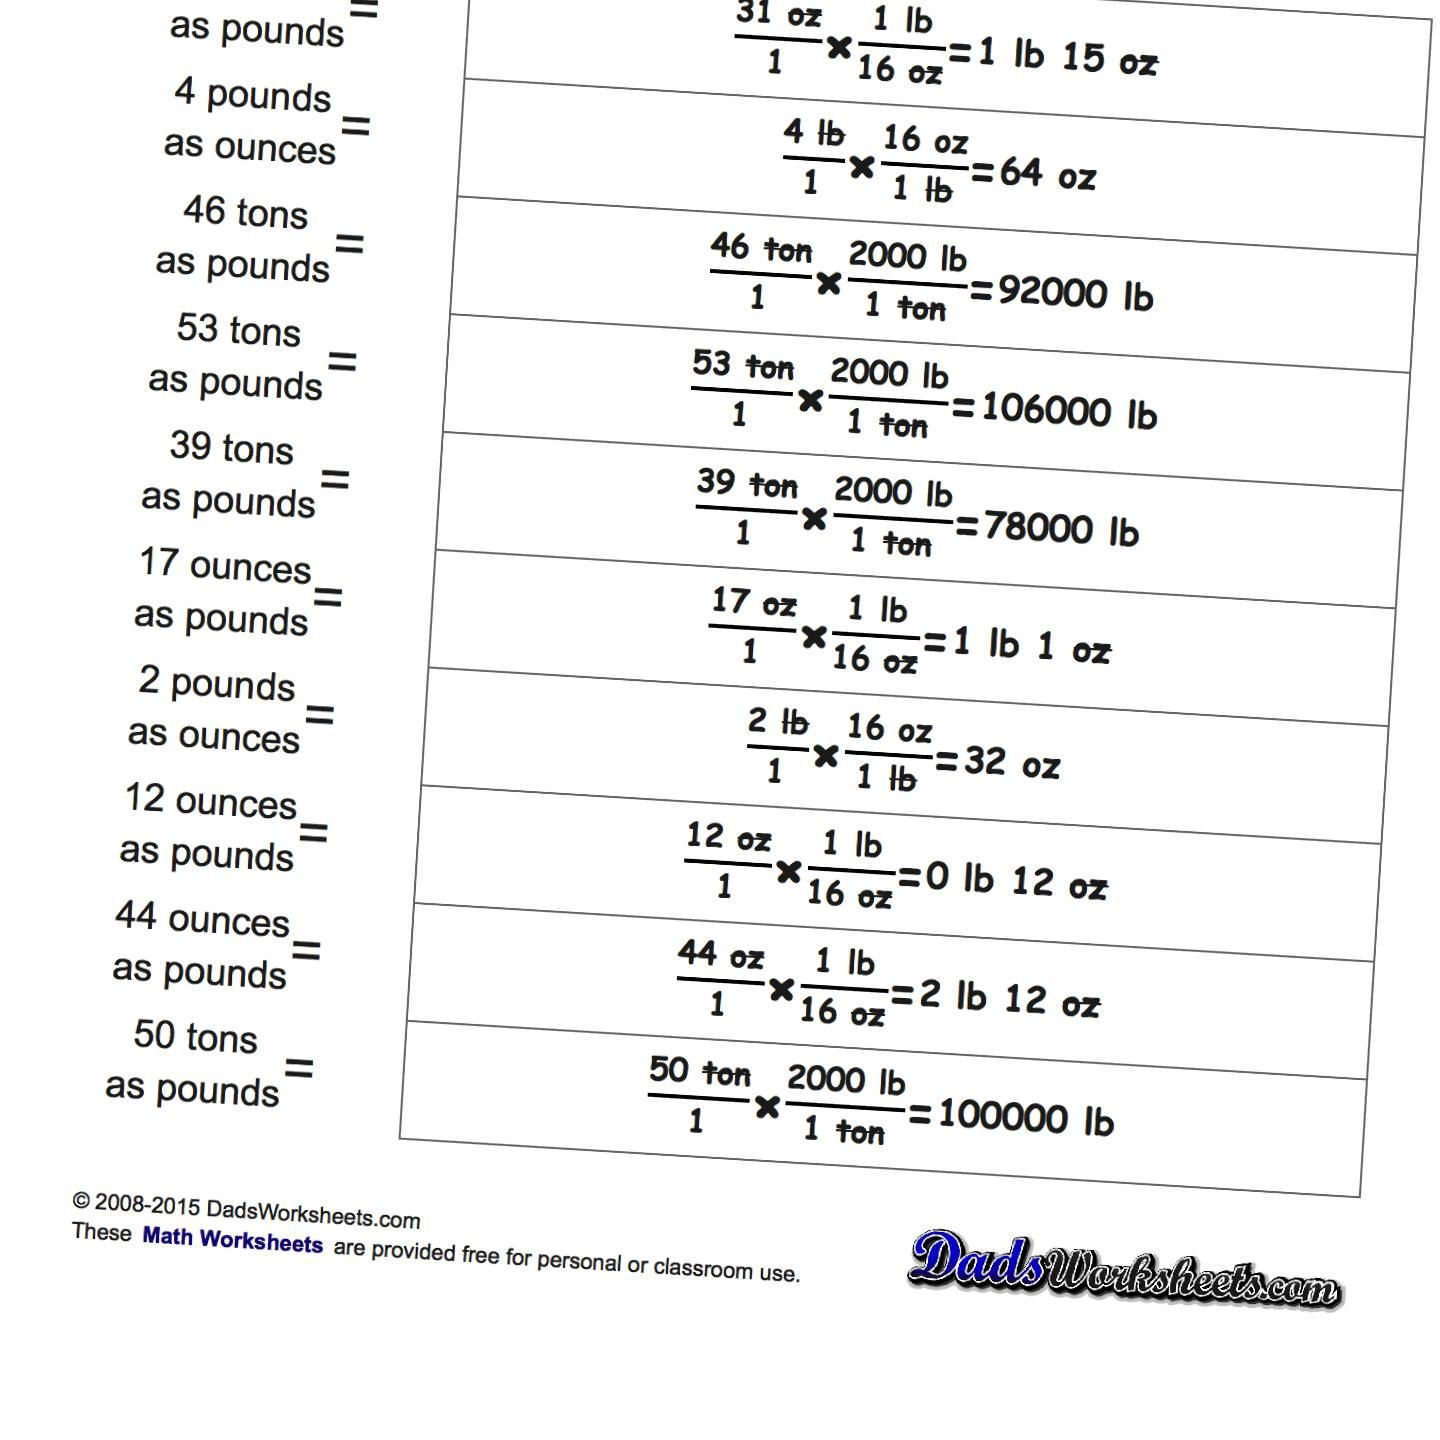 Mass Unit Conversion Worksheets Great For Math And Physics | Free Printable Physics Worksheets